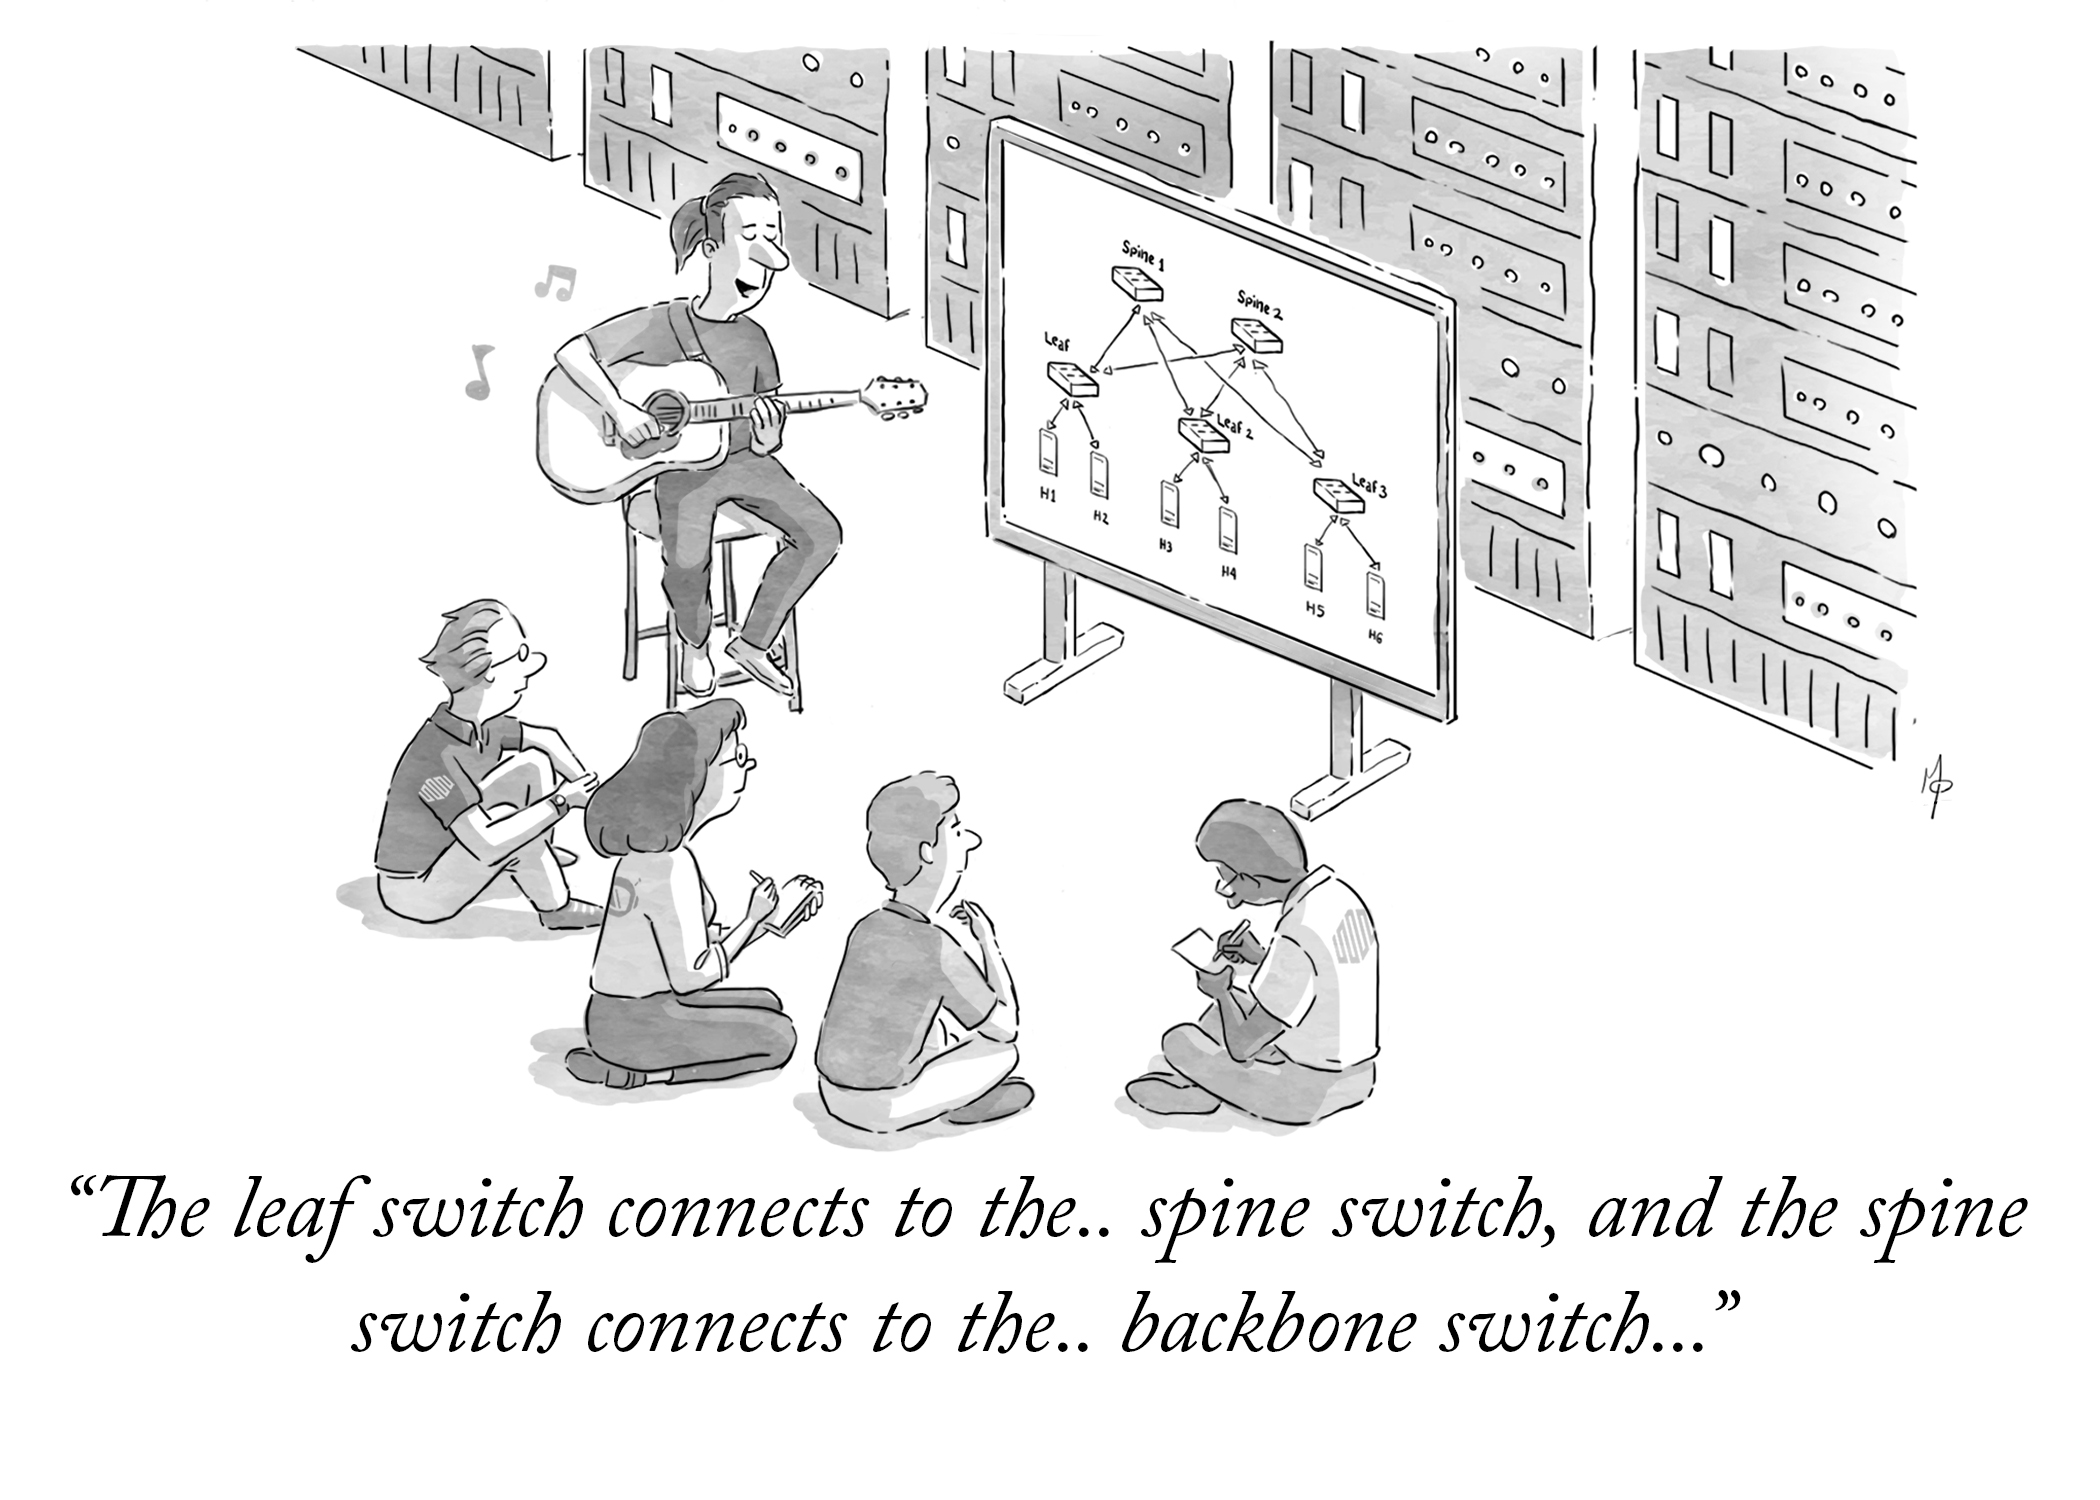 New Yorker style illustration. A a man is singing to a group of children while playing the guitar. A whiteboard has technical diagrams on it. The caption reads: The leaf switch connects to the, spine switch, and the spine switch connects to the, backbone switch